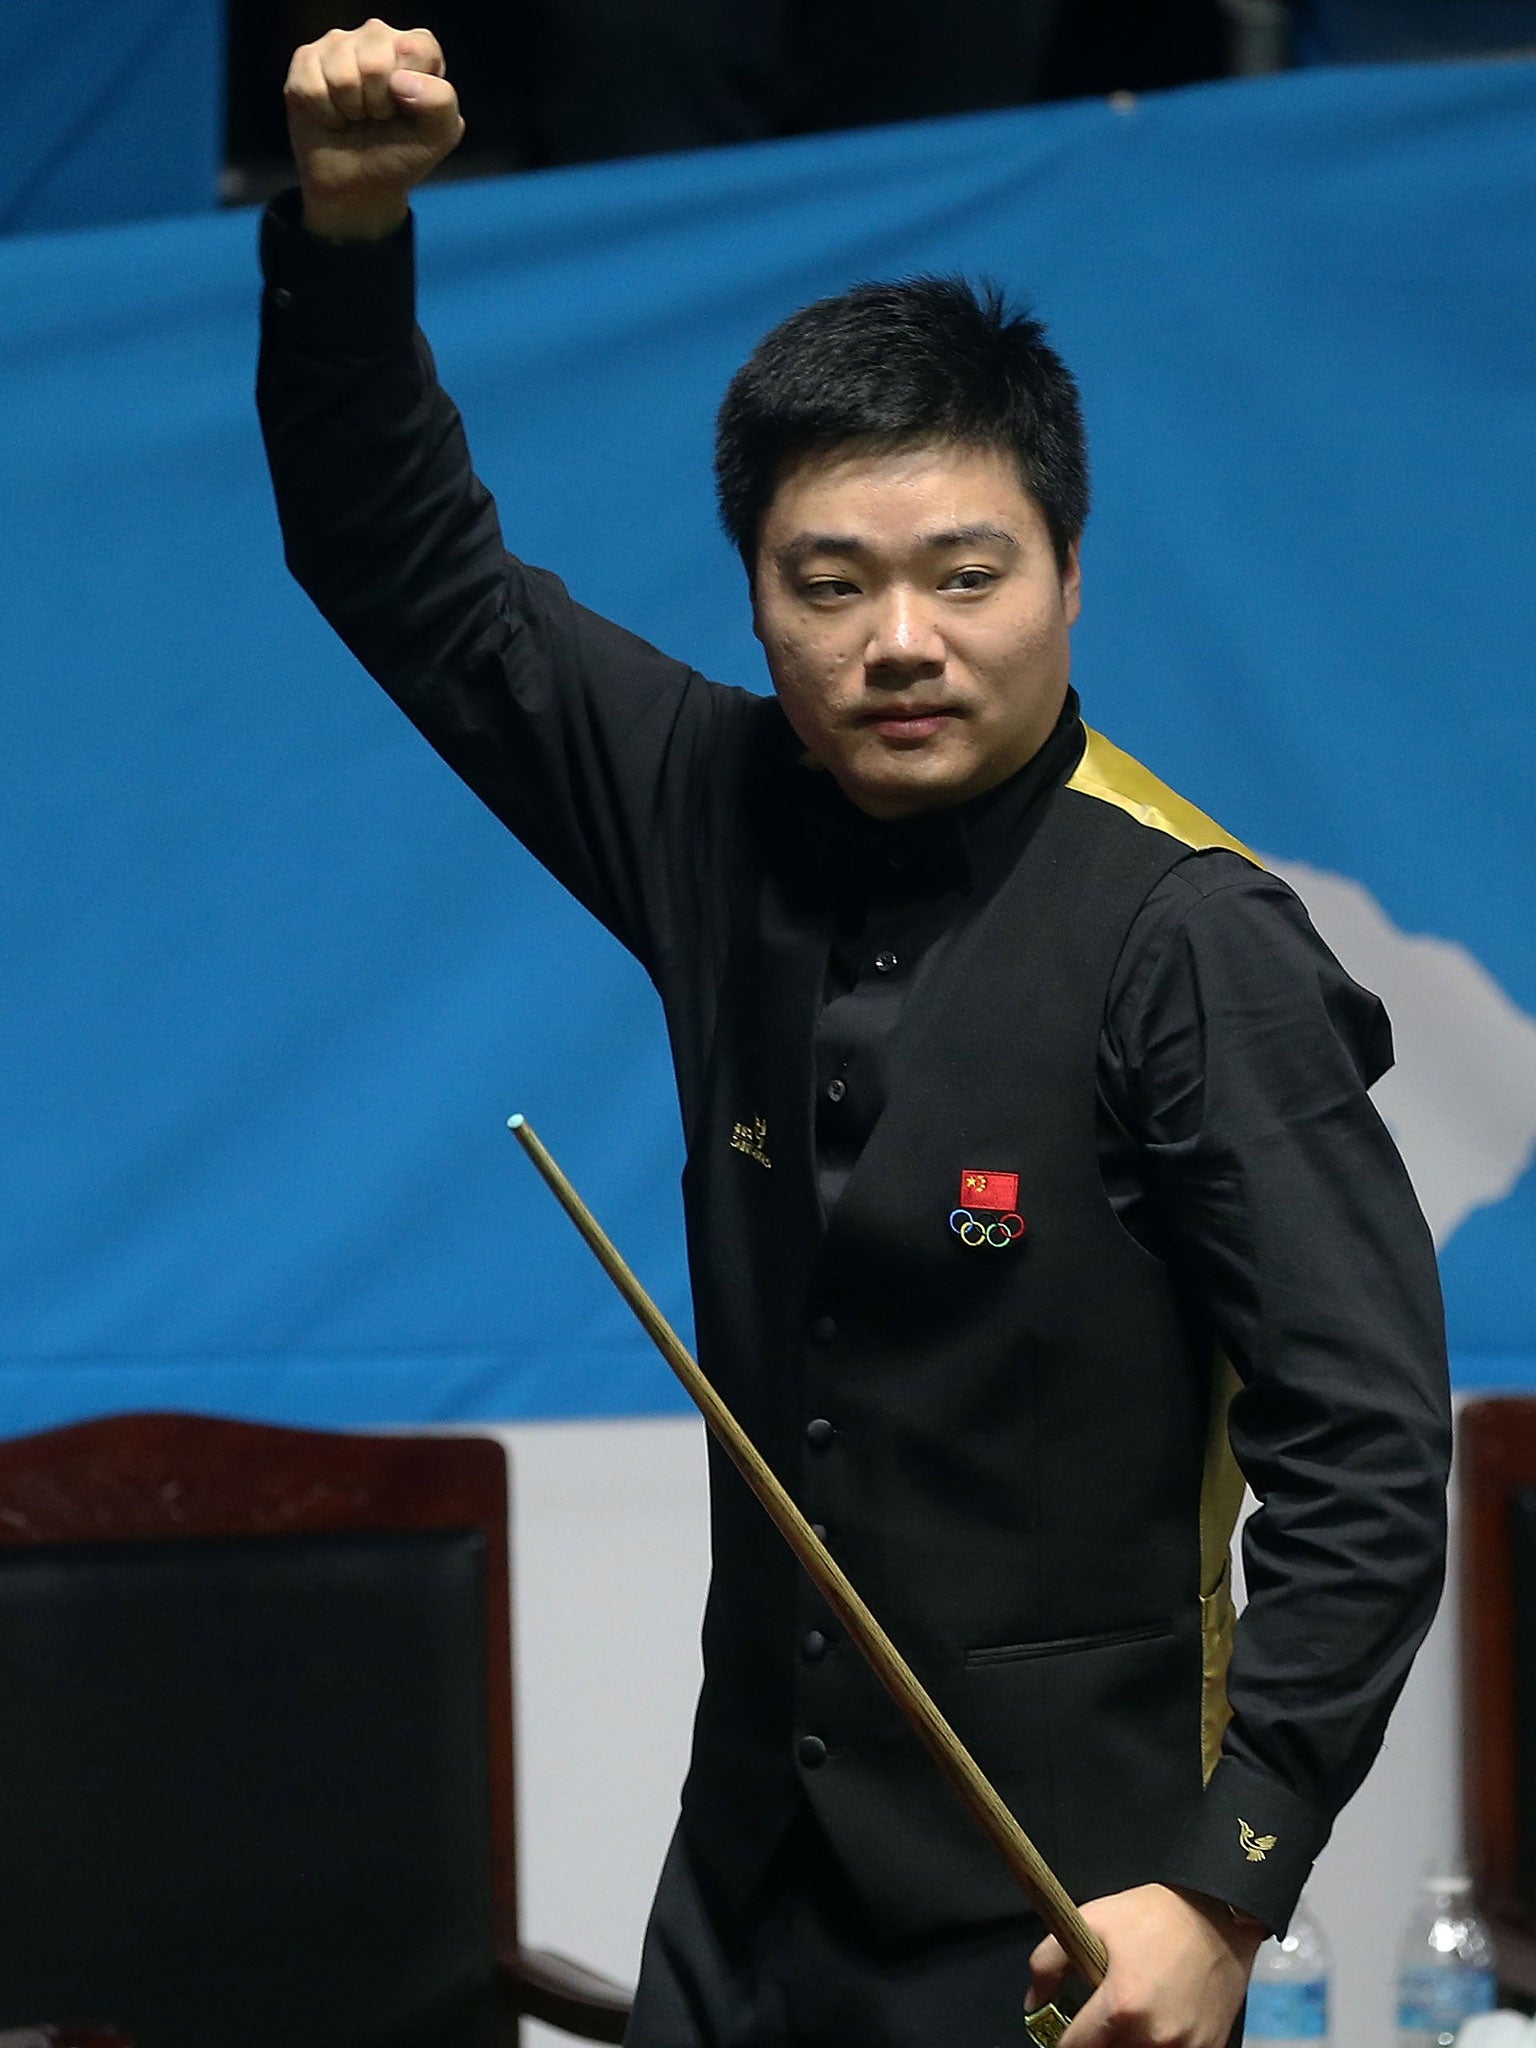 Ding Junhui makes history with his victory over Marco Fu